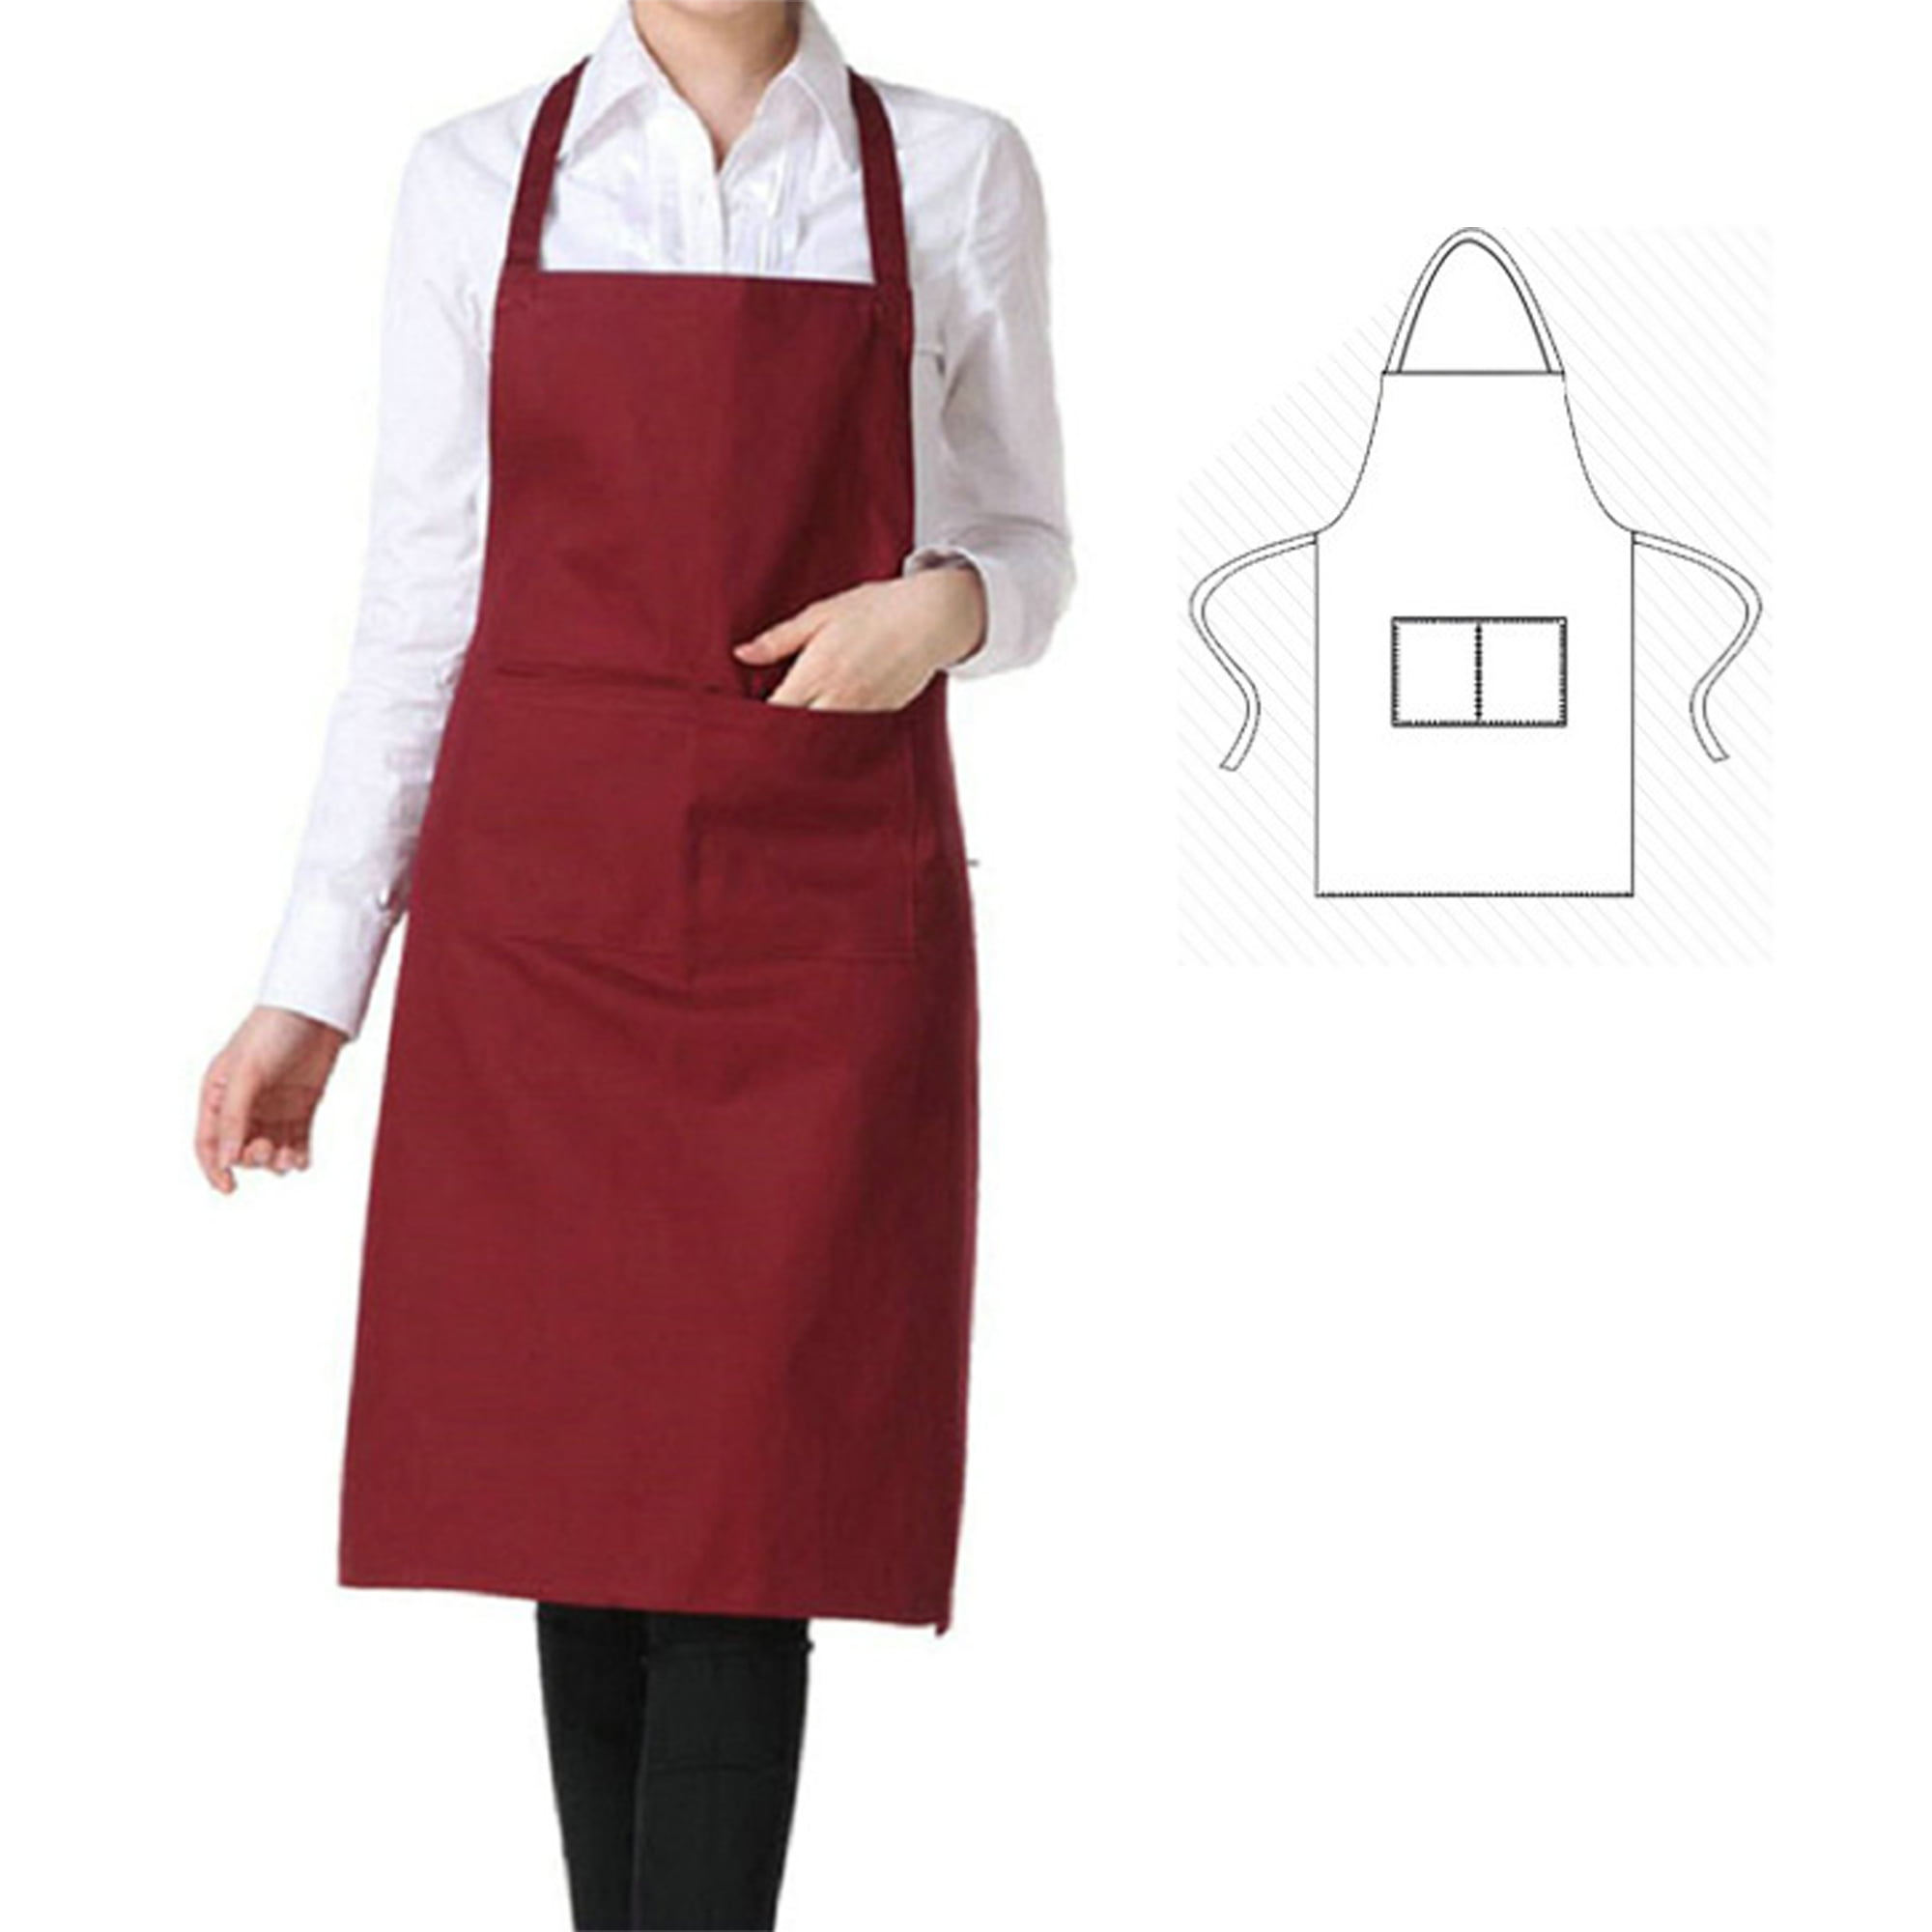 chef smock cook Custom Apron Personalized w/ YOUR TEXT Waiter Size 22" x 30" 